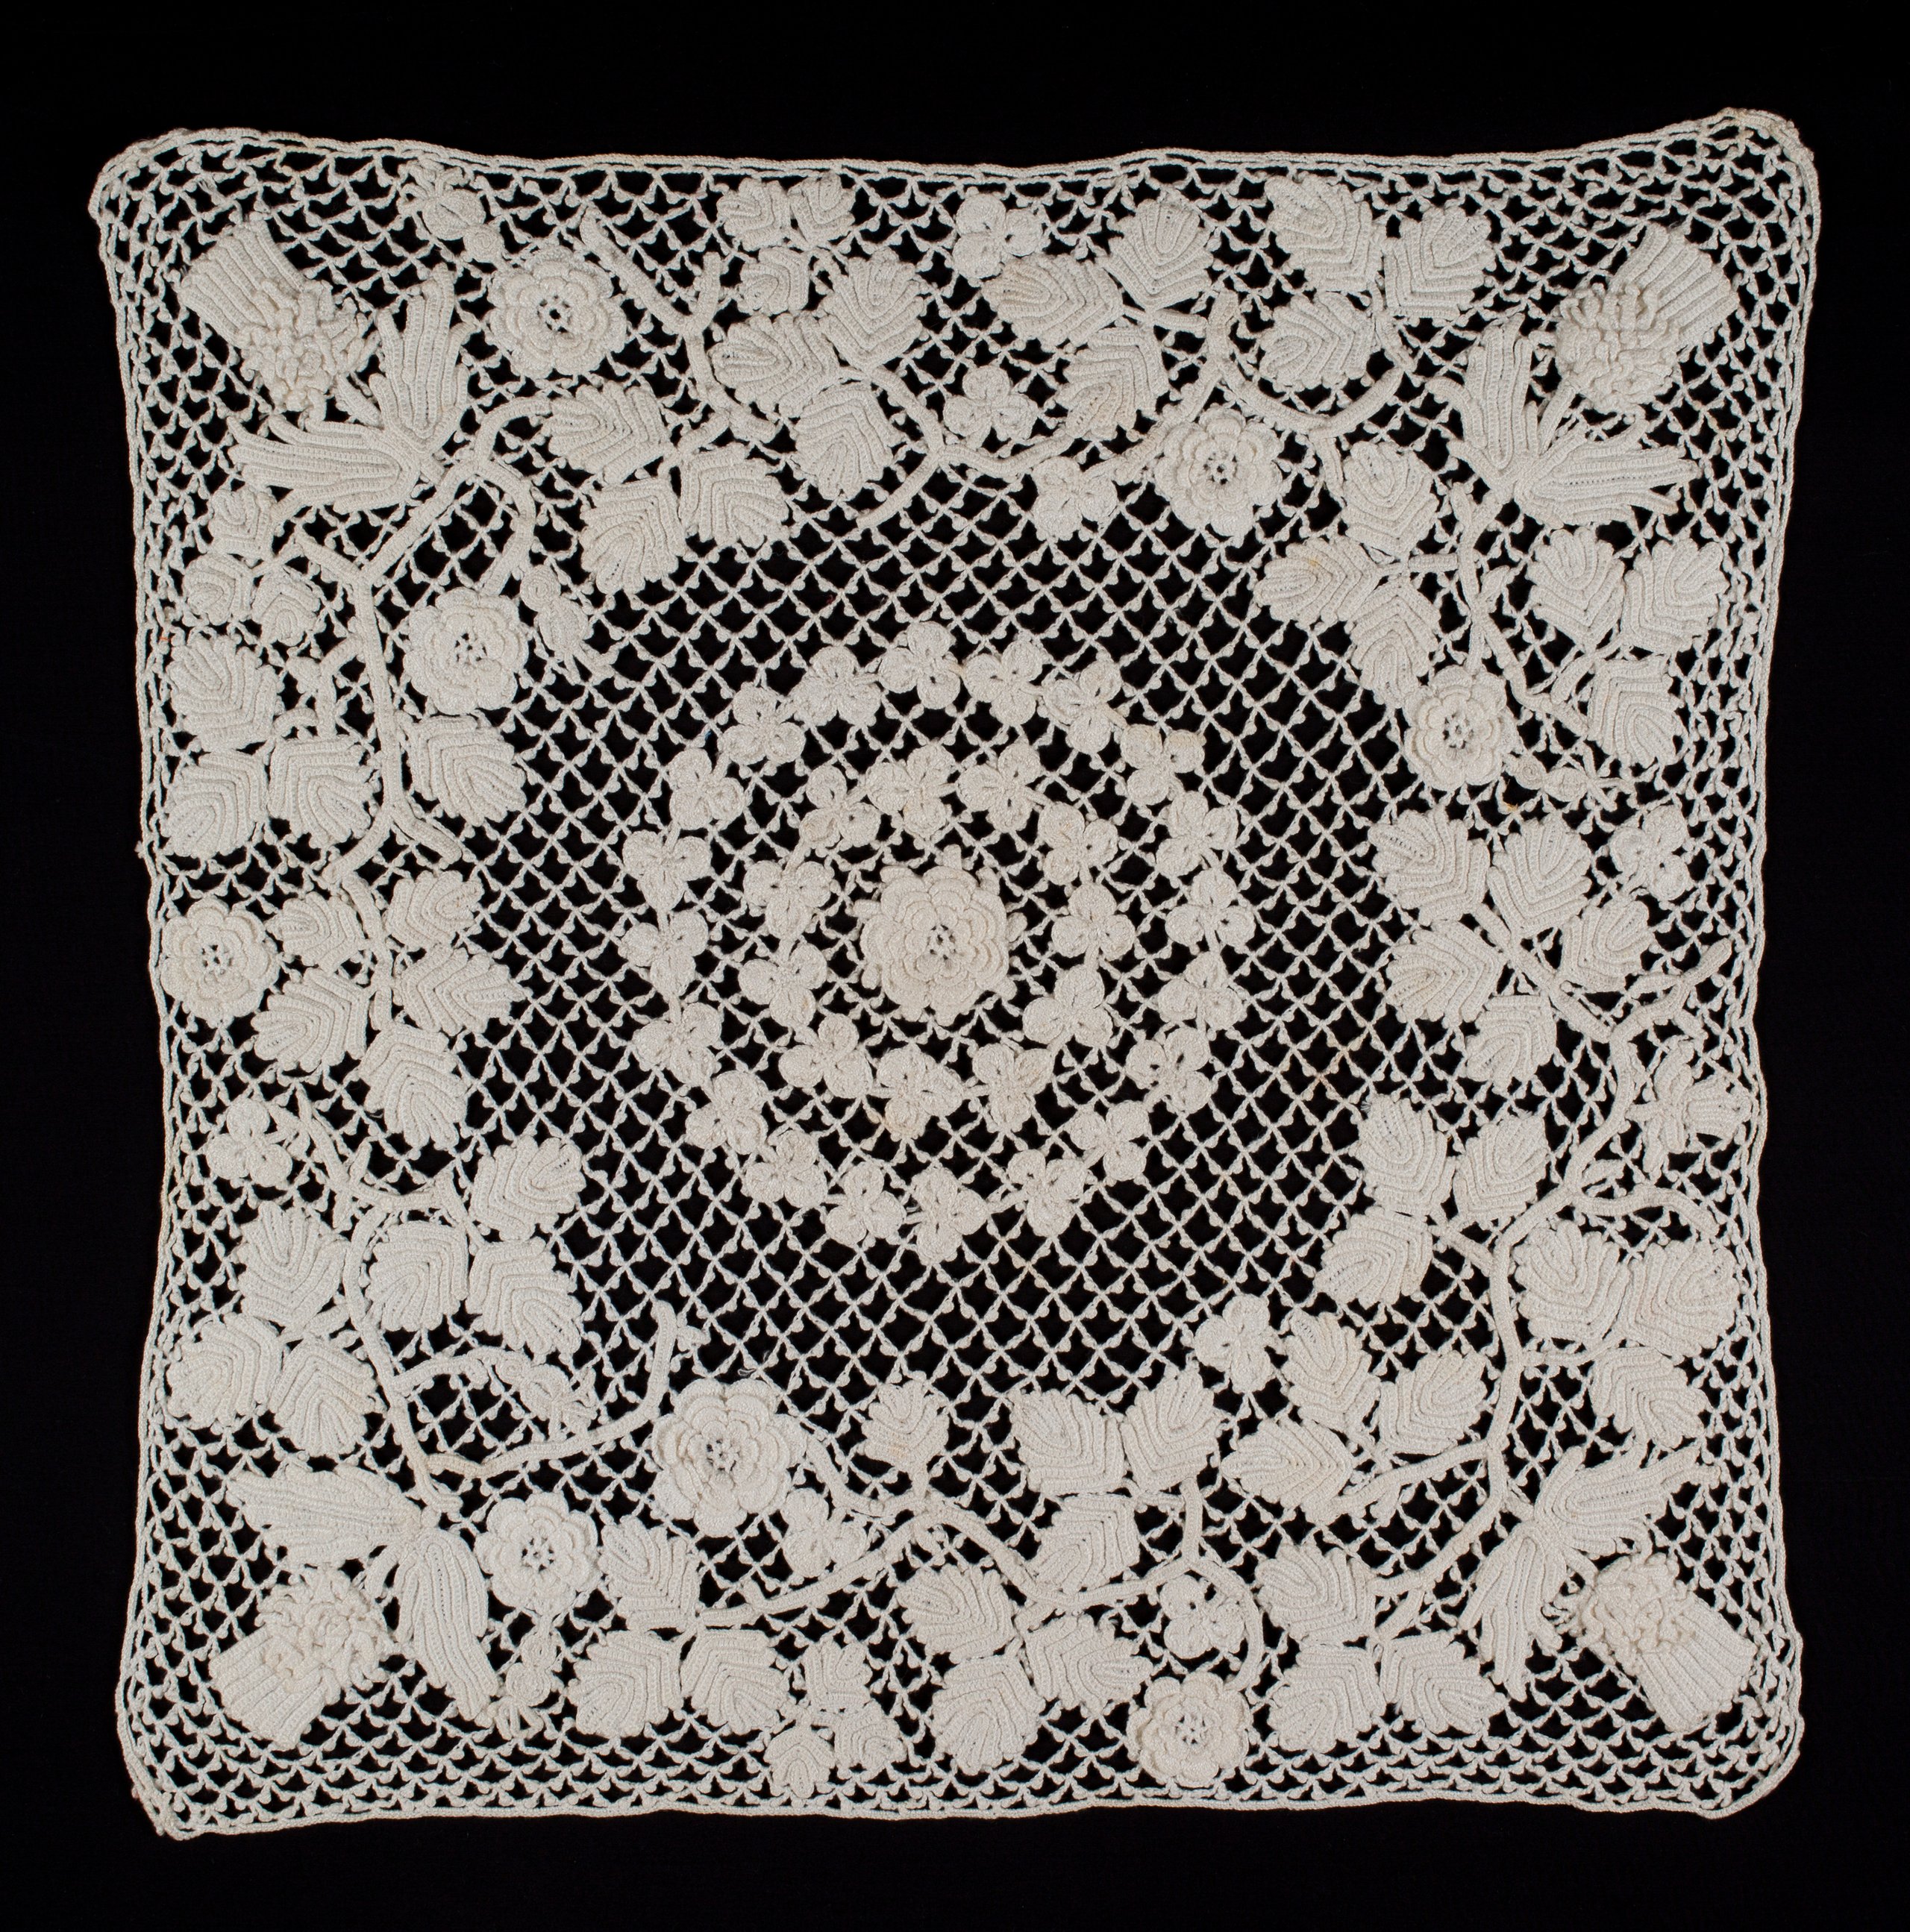 Lace piece made by Margaret Ann Field